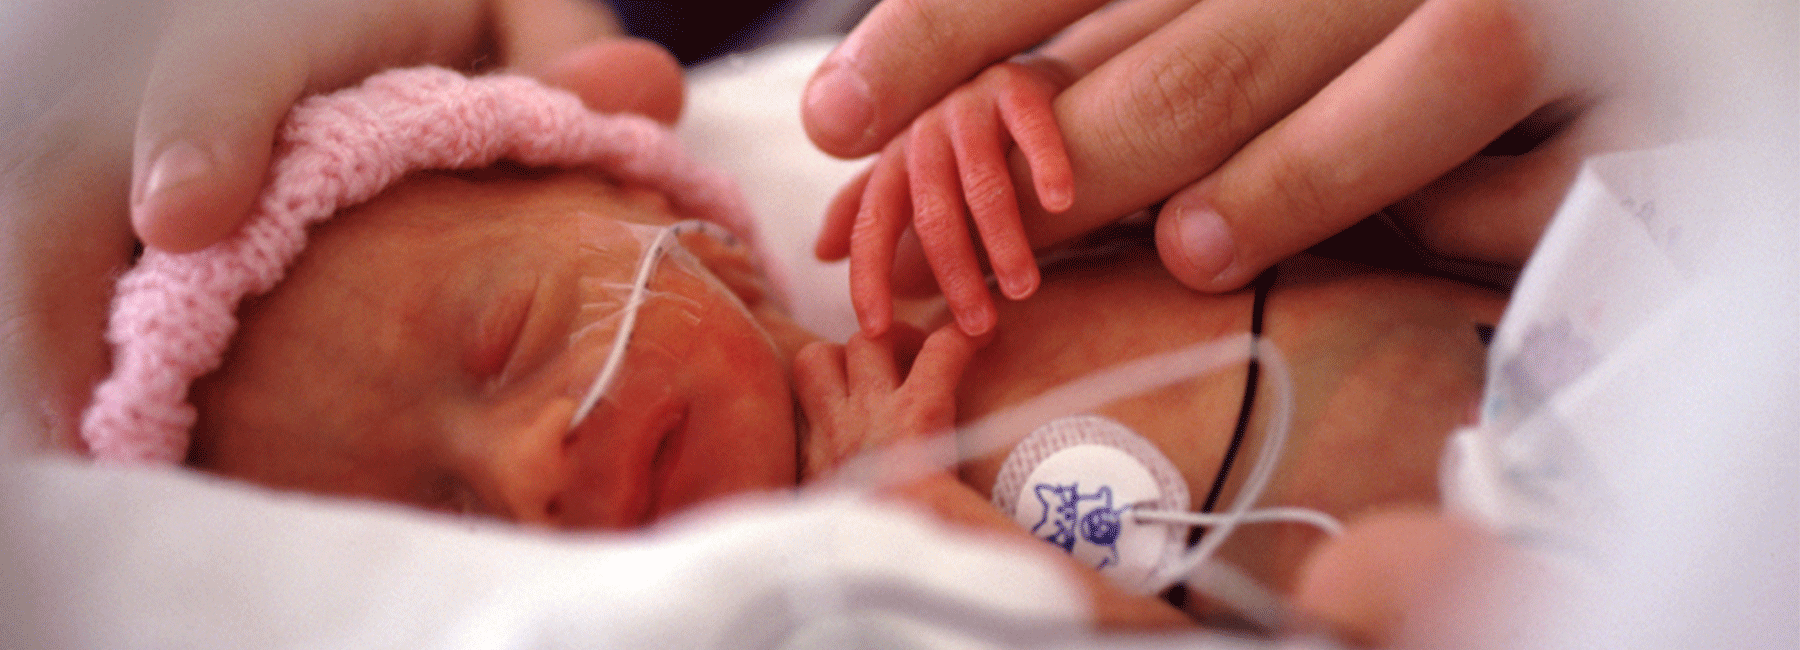 preemie-with-pink-hat-1800px